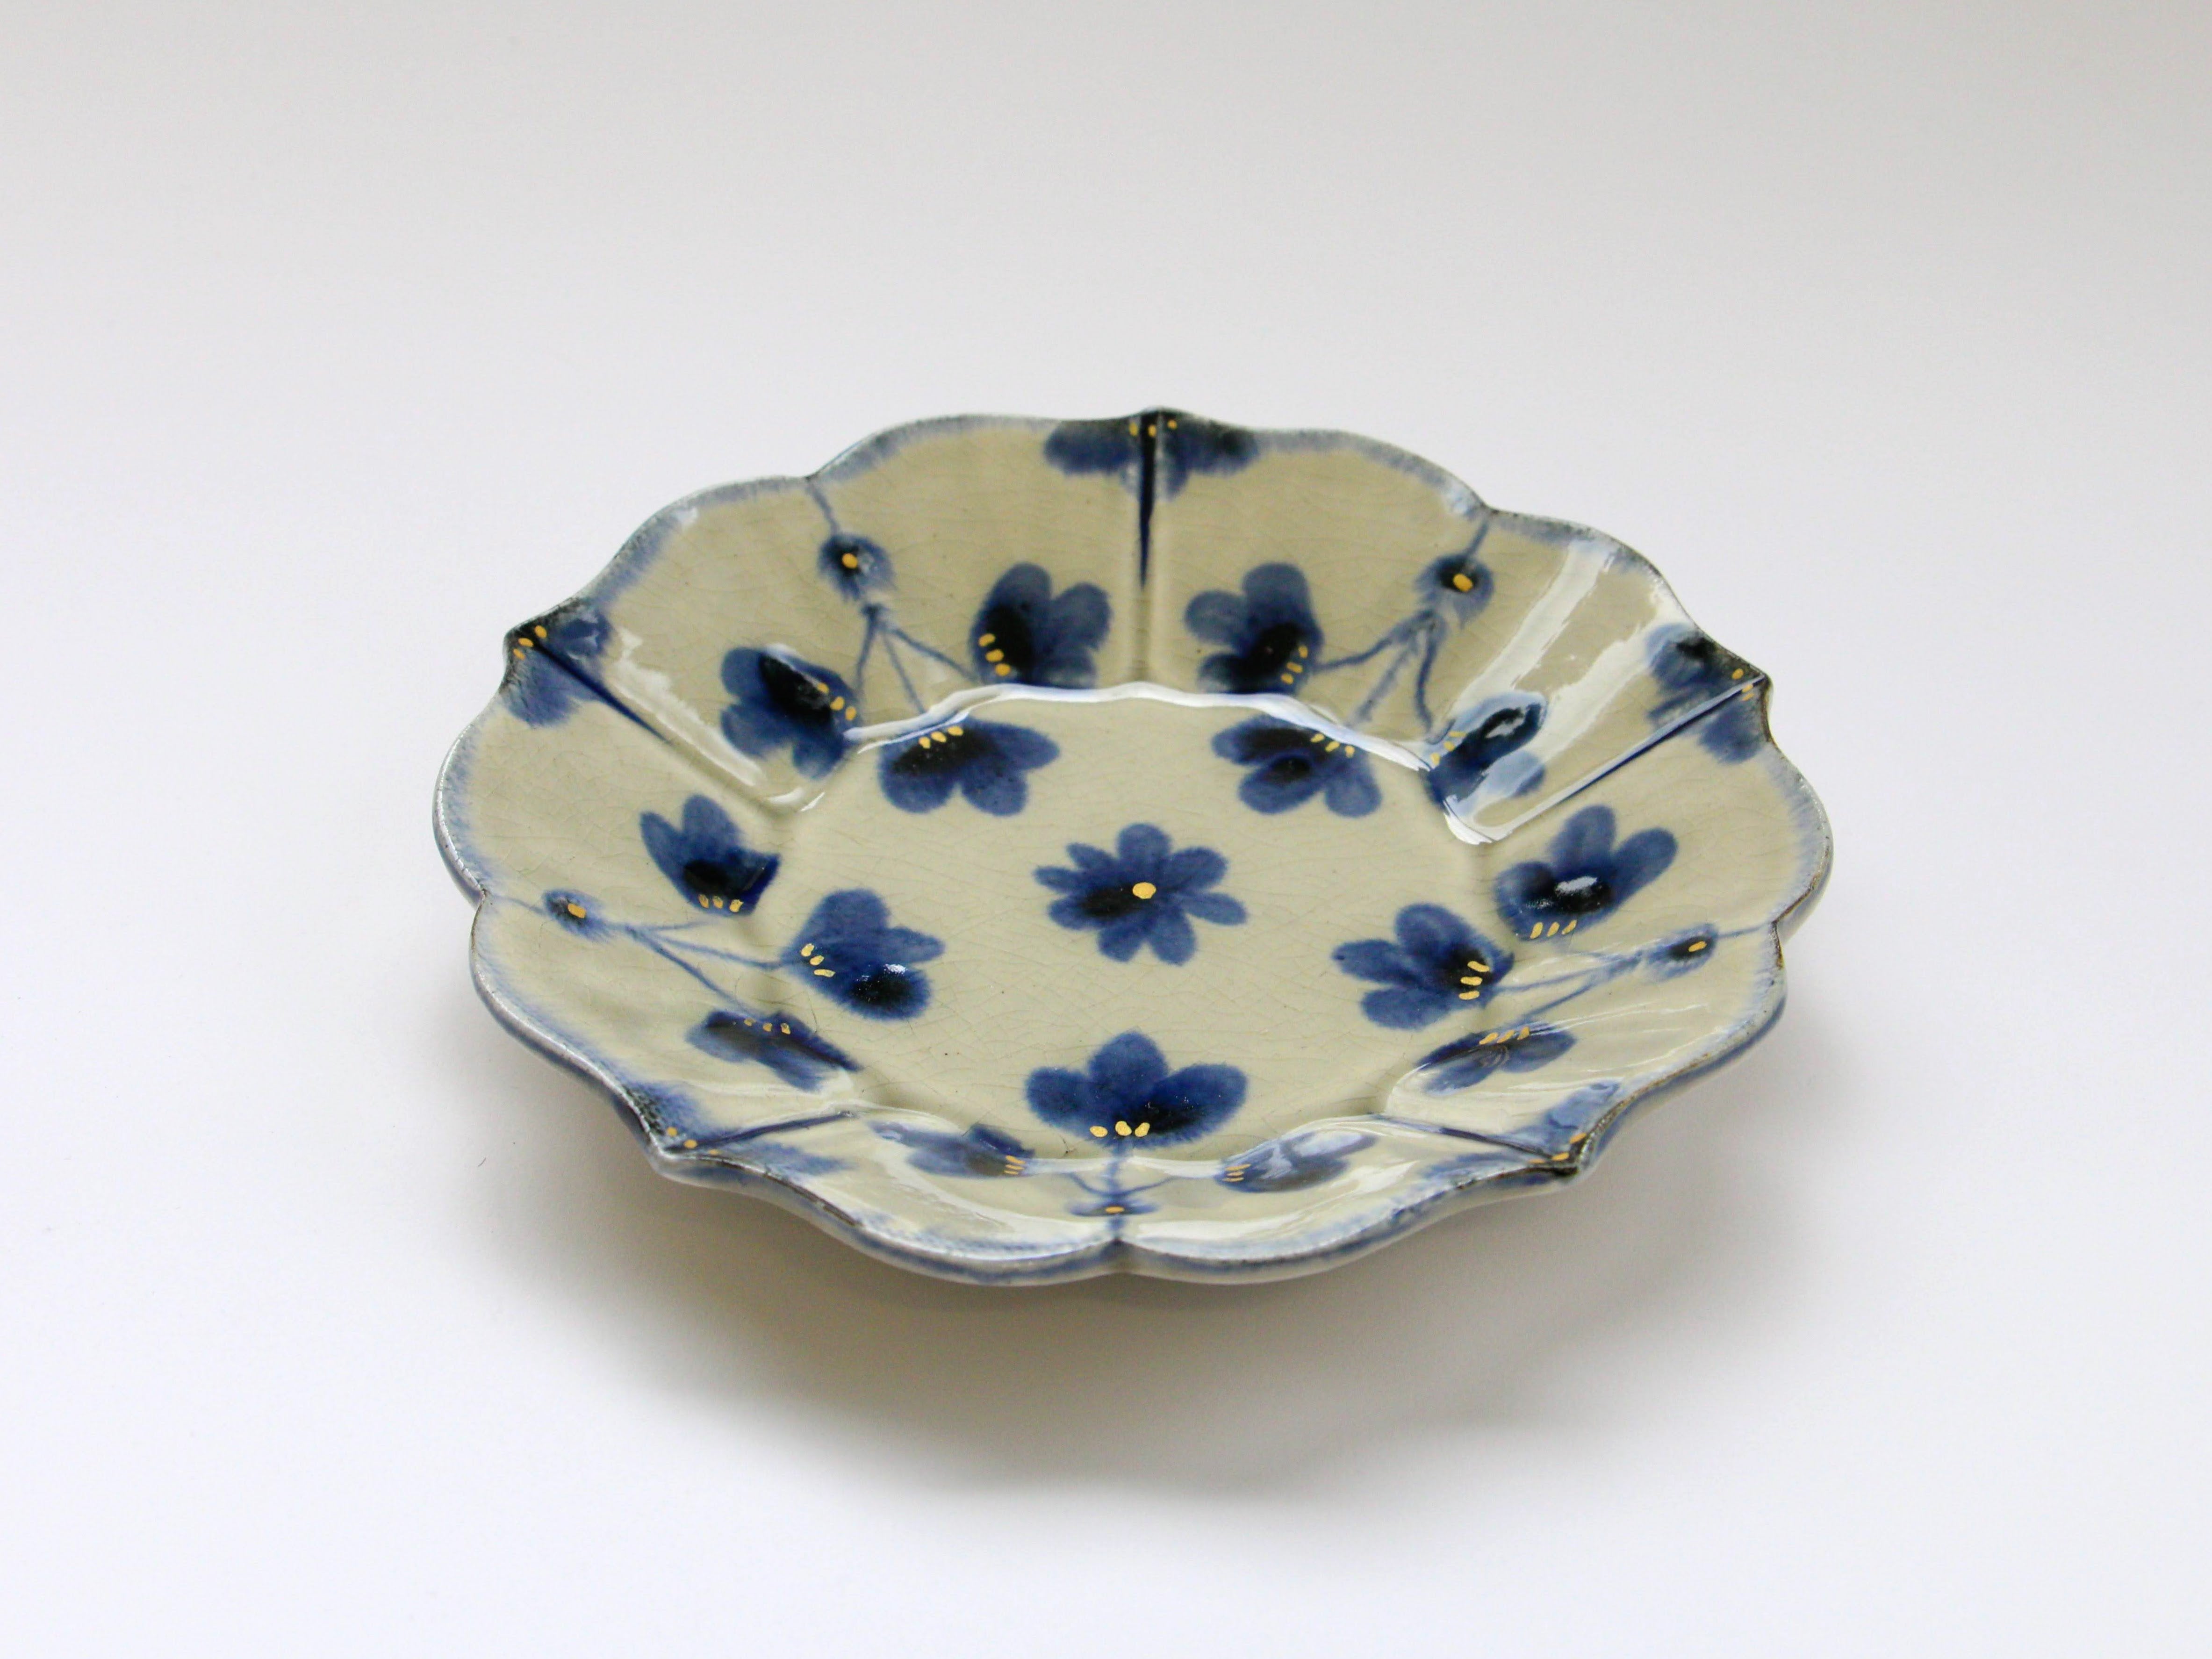 Gold-colored clay glaze flower pattern bellflower plate small [Kituru Seito]